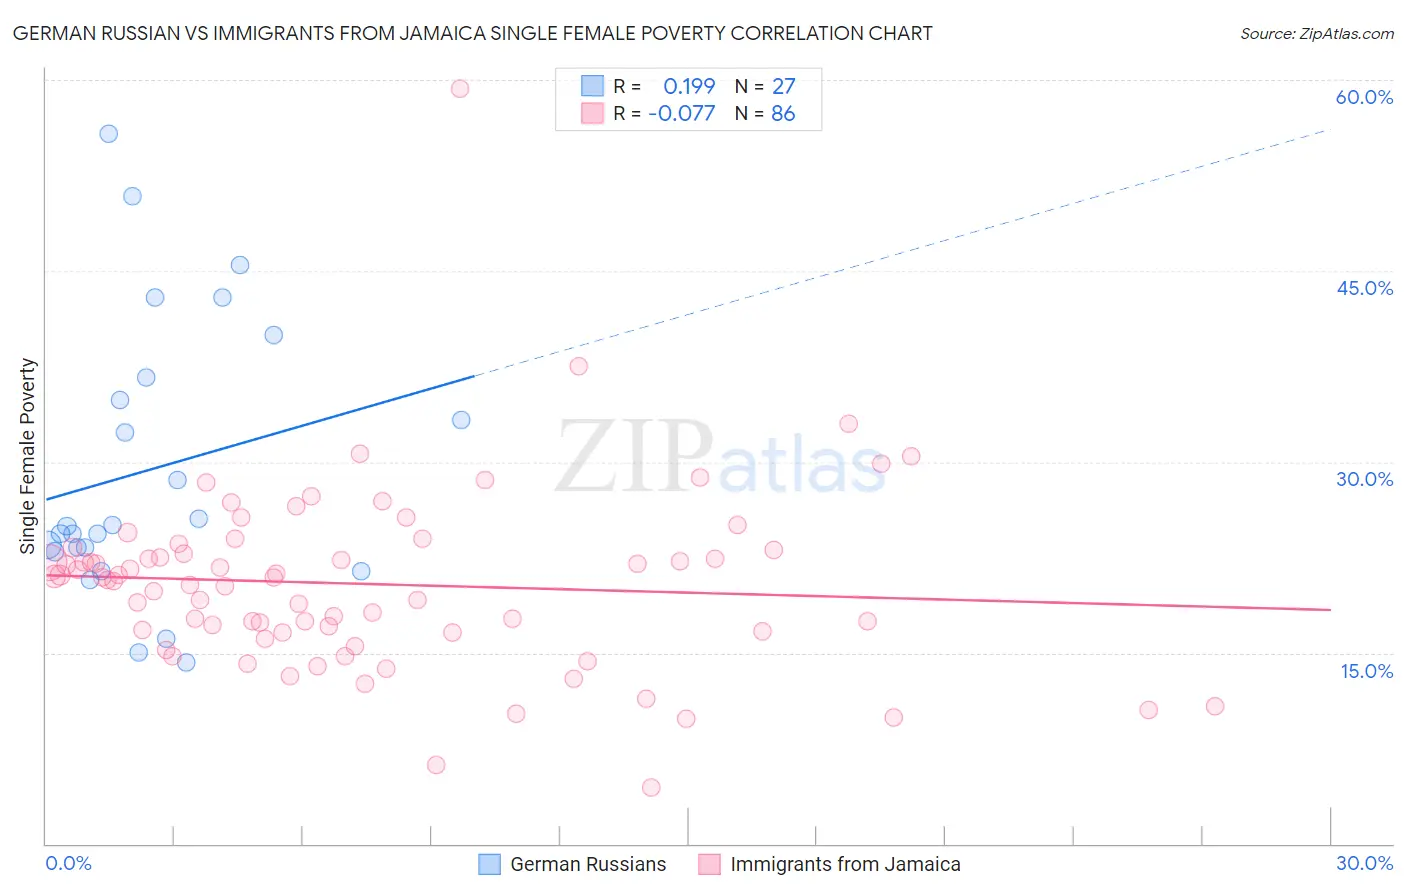 German Russian vs Immigrants from Jamaica Single Female Poverty